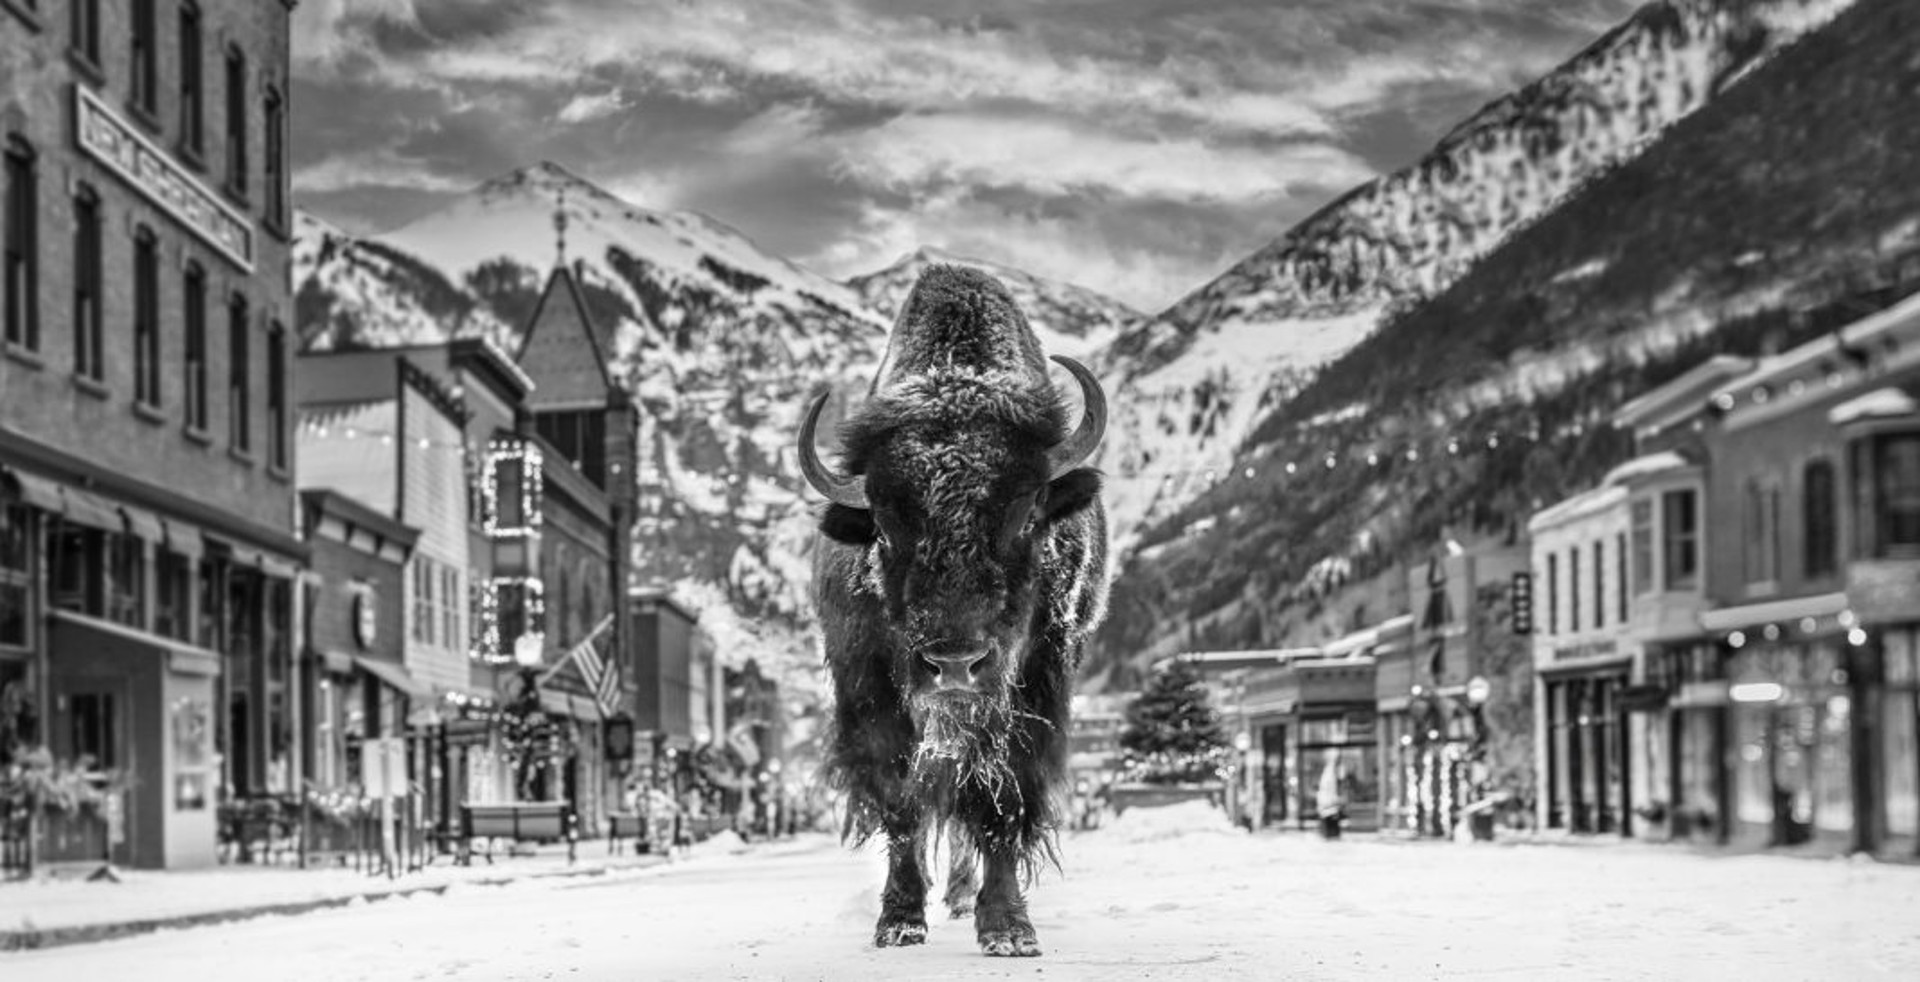 The Bison on Main by David Yarrow